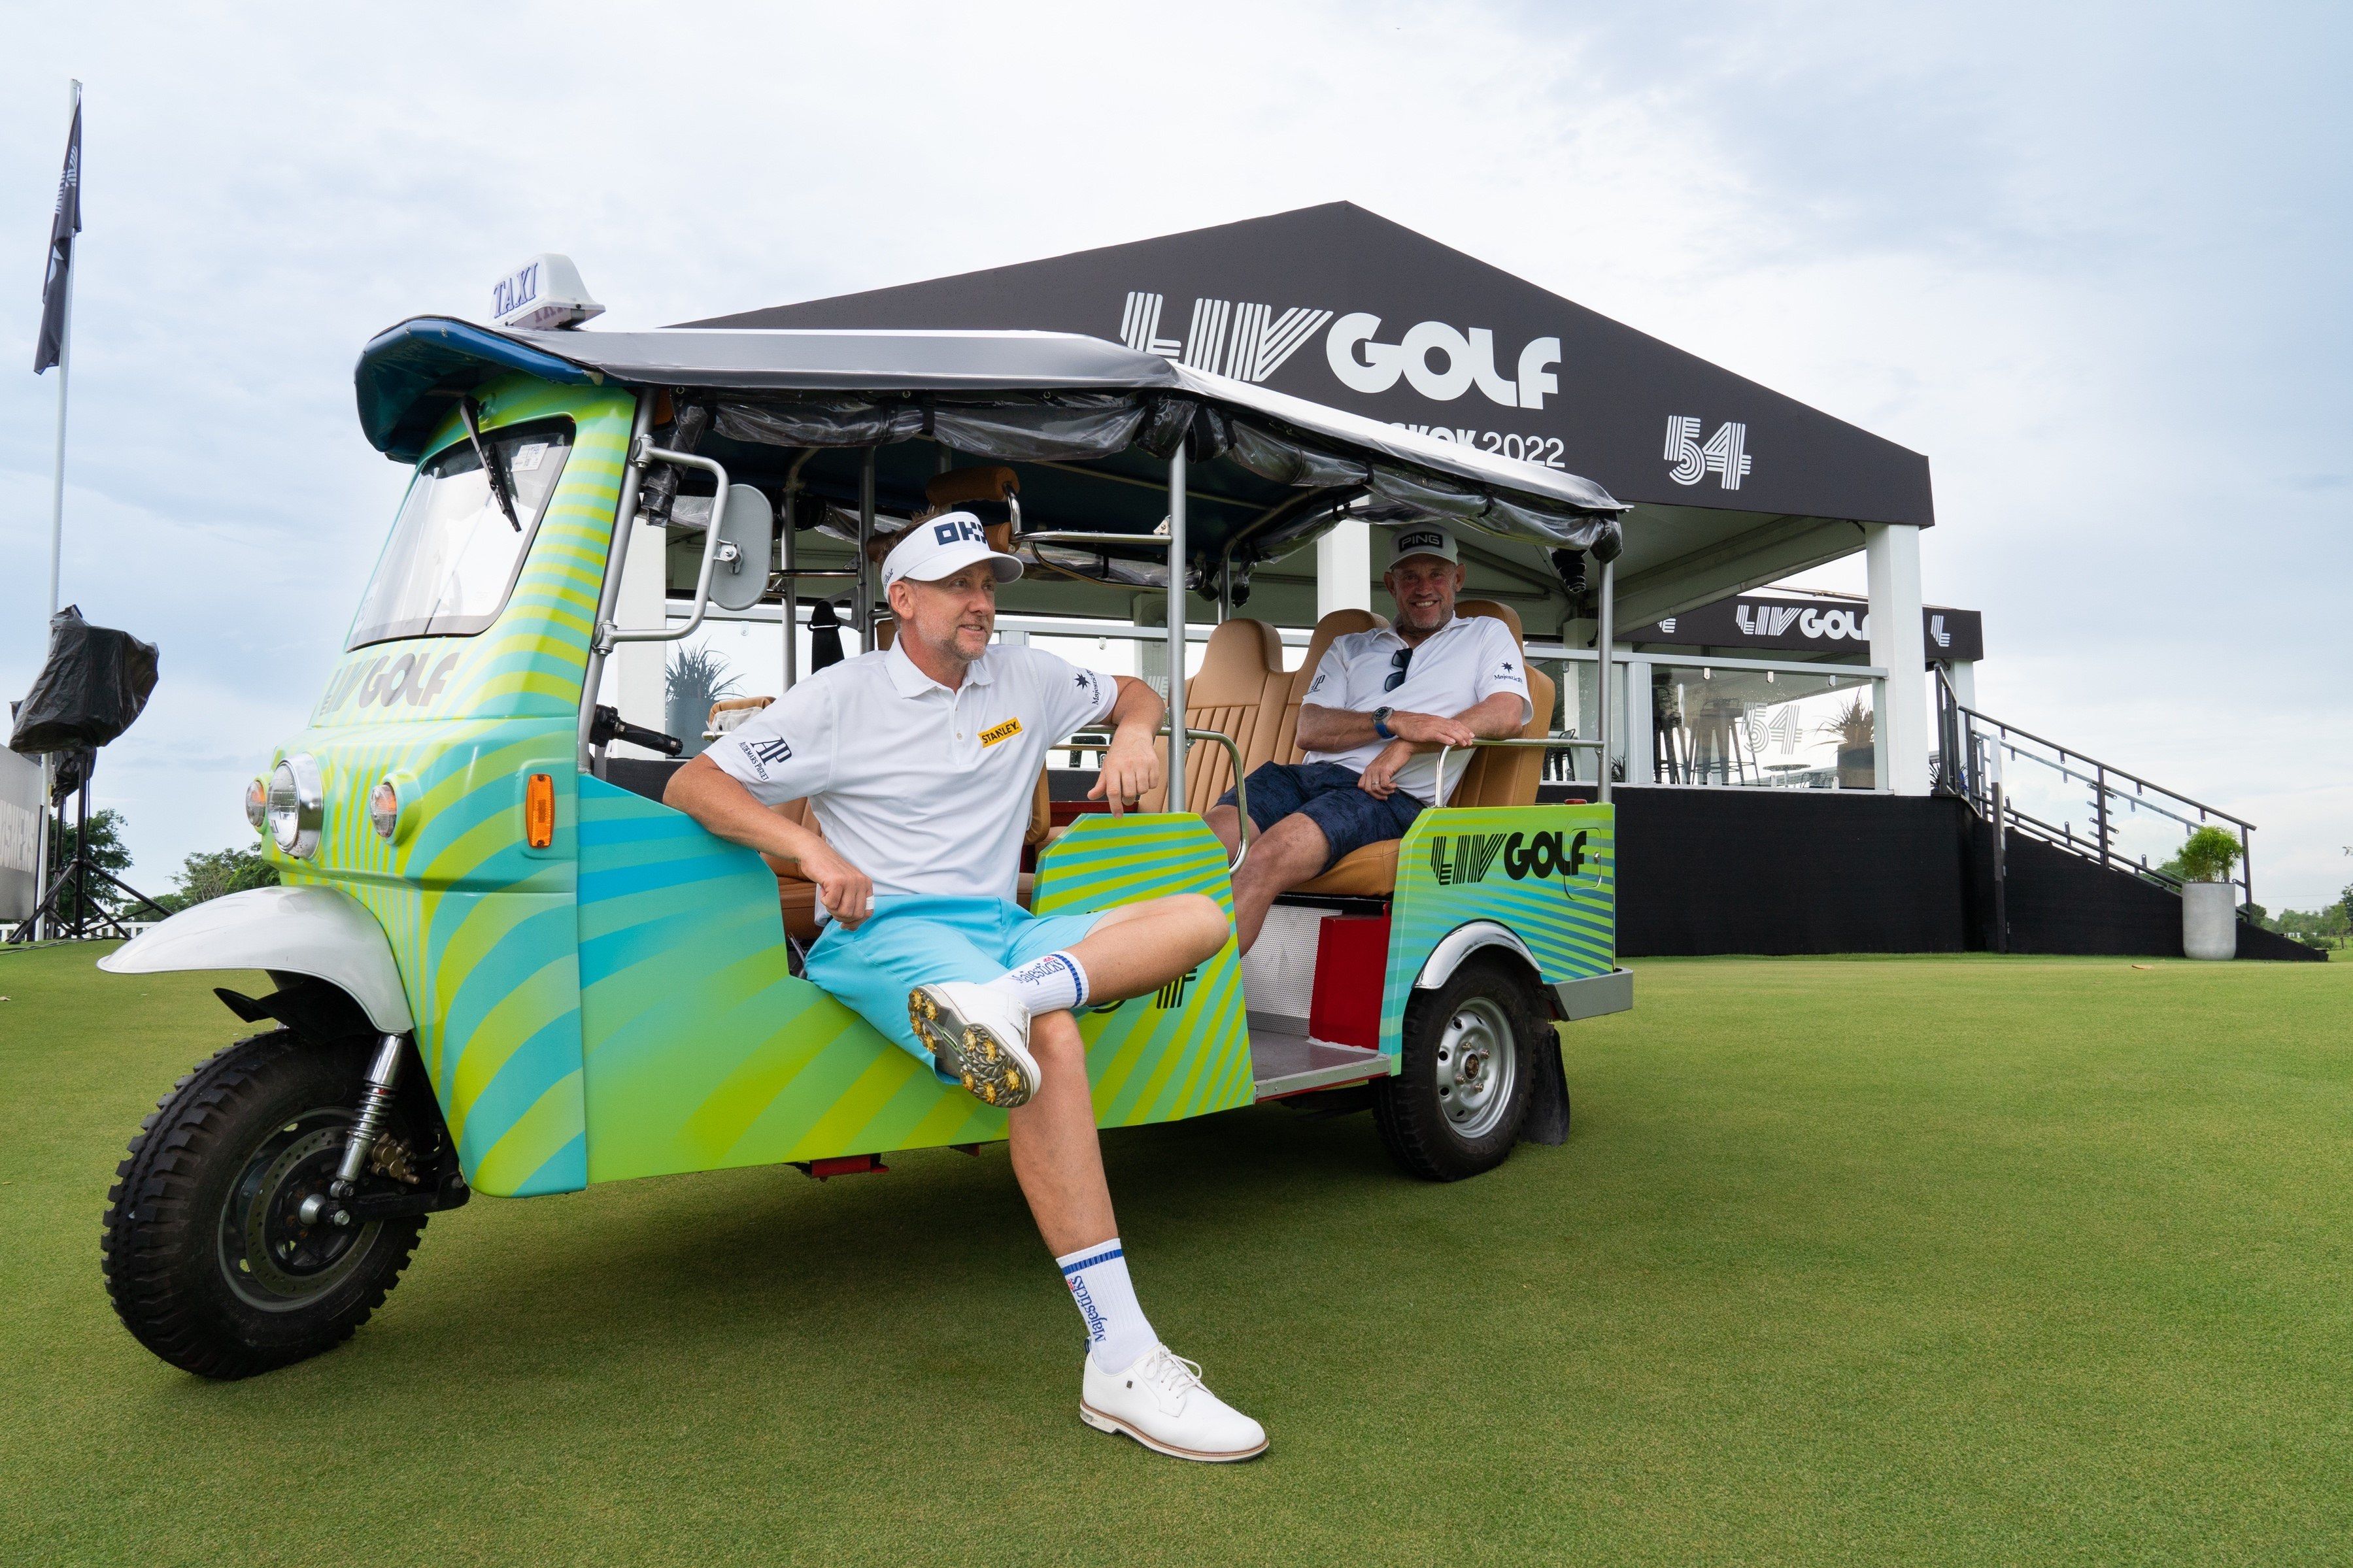 Ian Poulter and Lee Westwood sitting in Tuktuks ahead at the LIV Golf Invitational Bangkok. Photo: LIV Golf